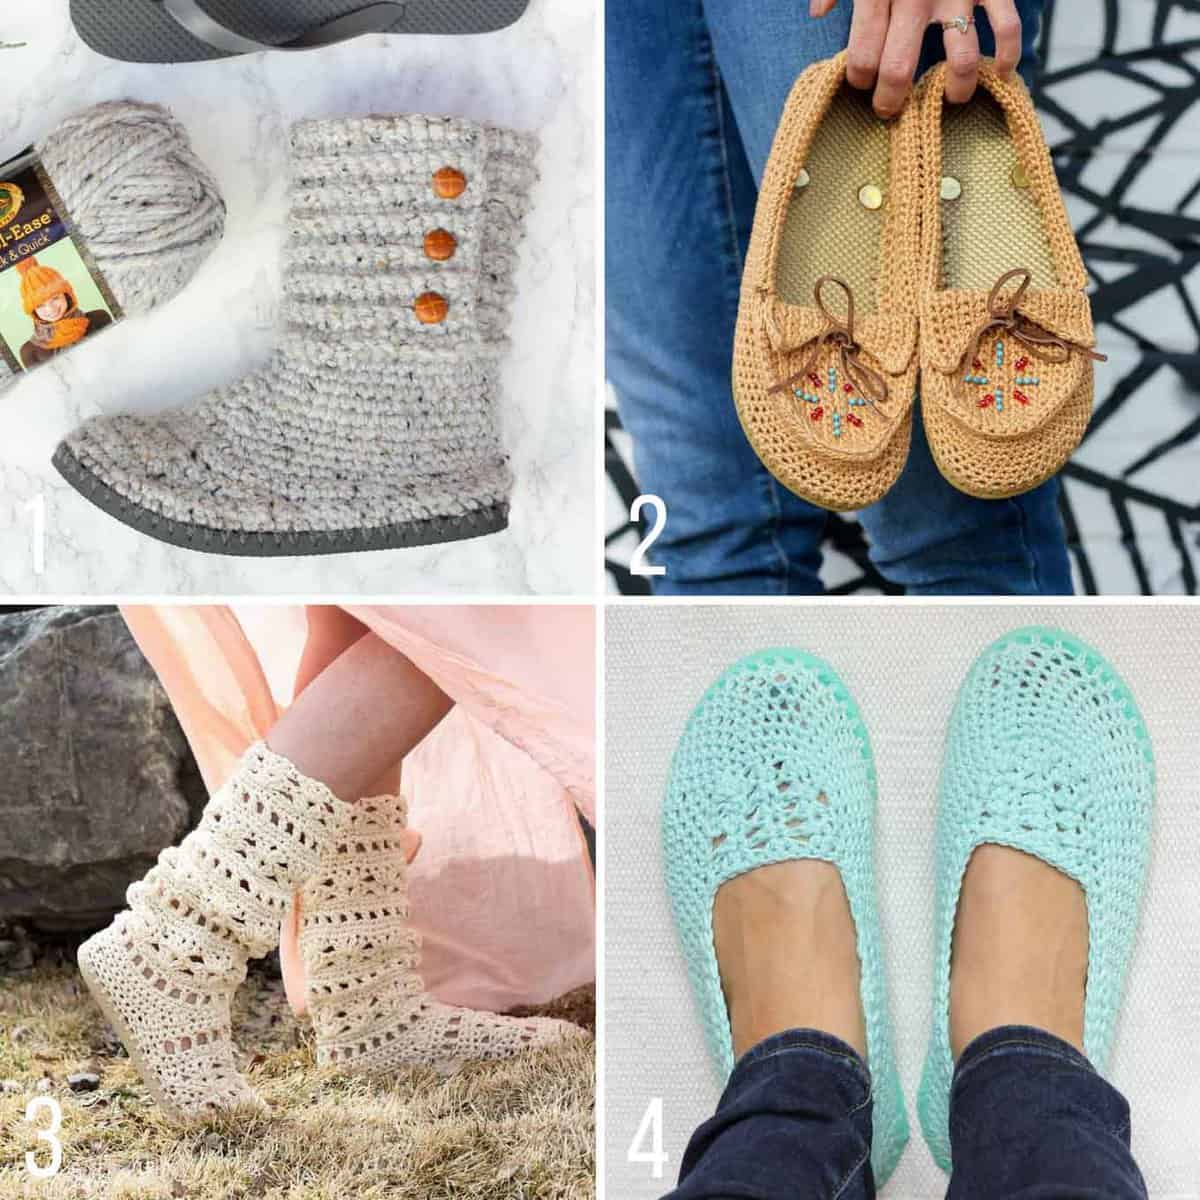 Free crochet patterns with flip flops soles from Make and Do Crew